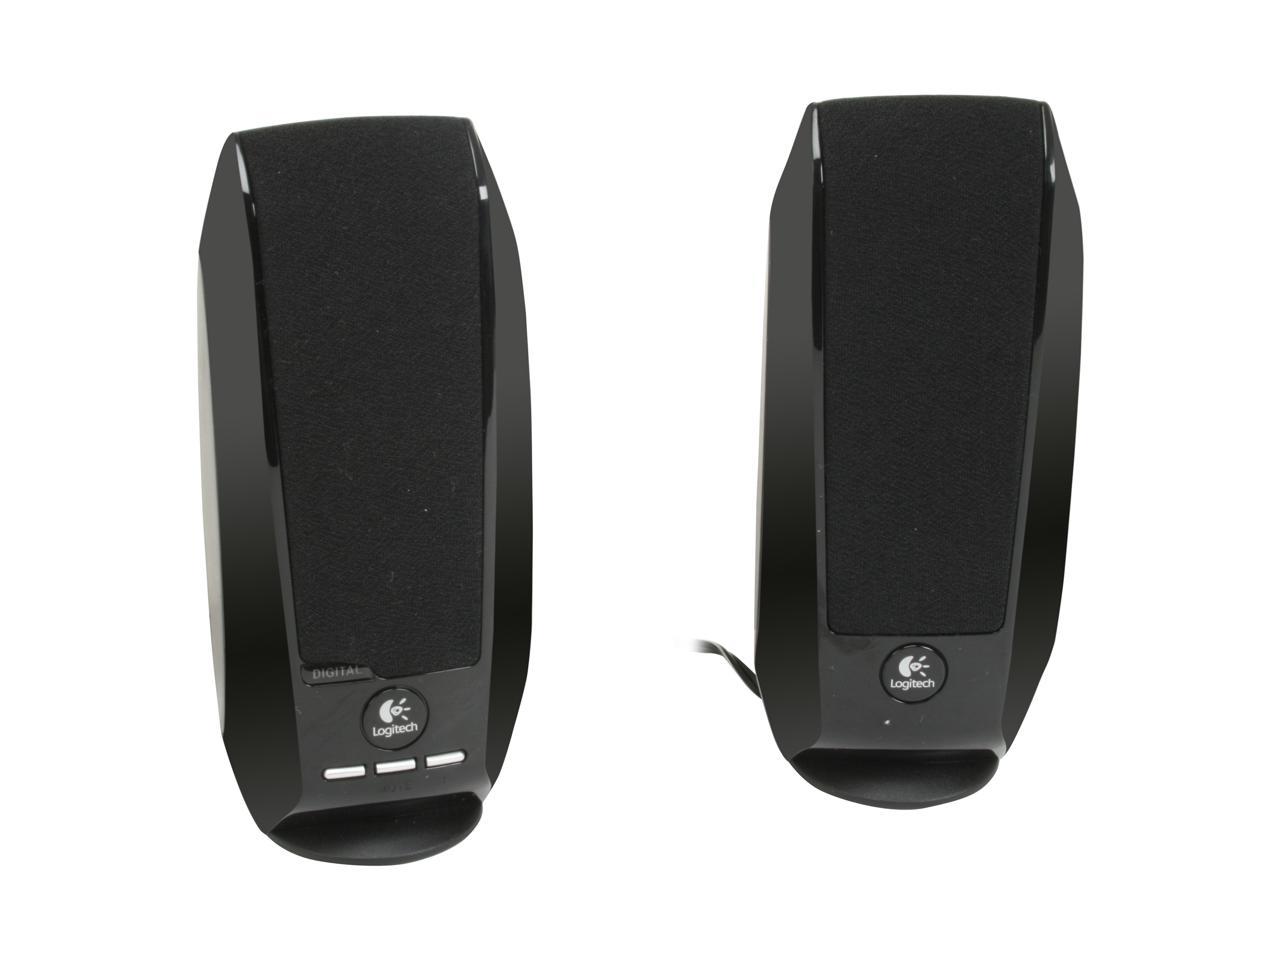 Logitech S150 USB Speakers with Digital Sound - image 1 of 5